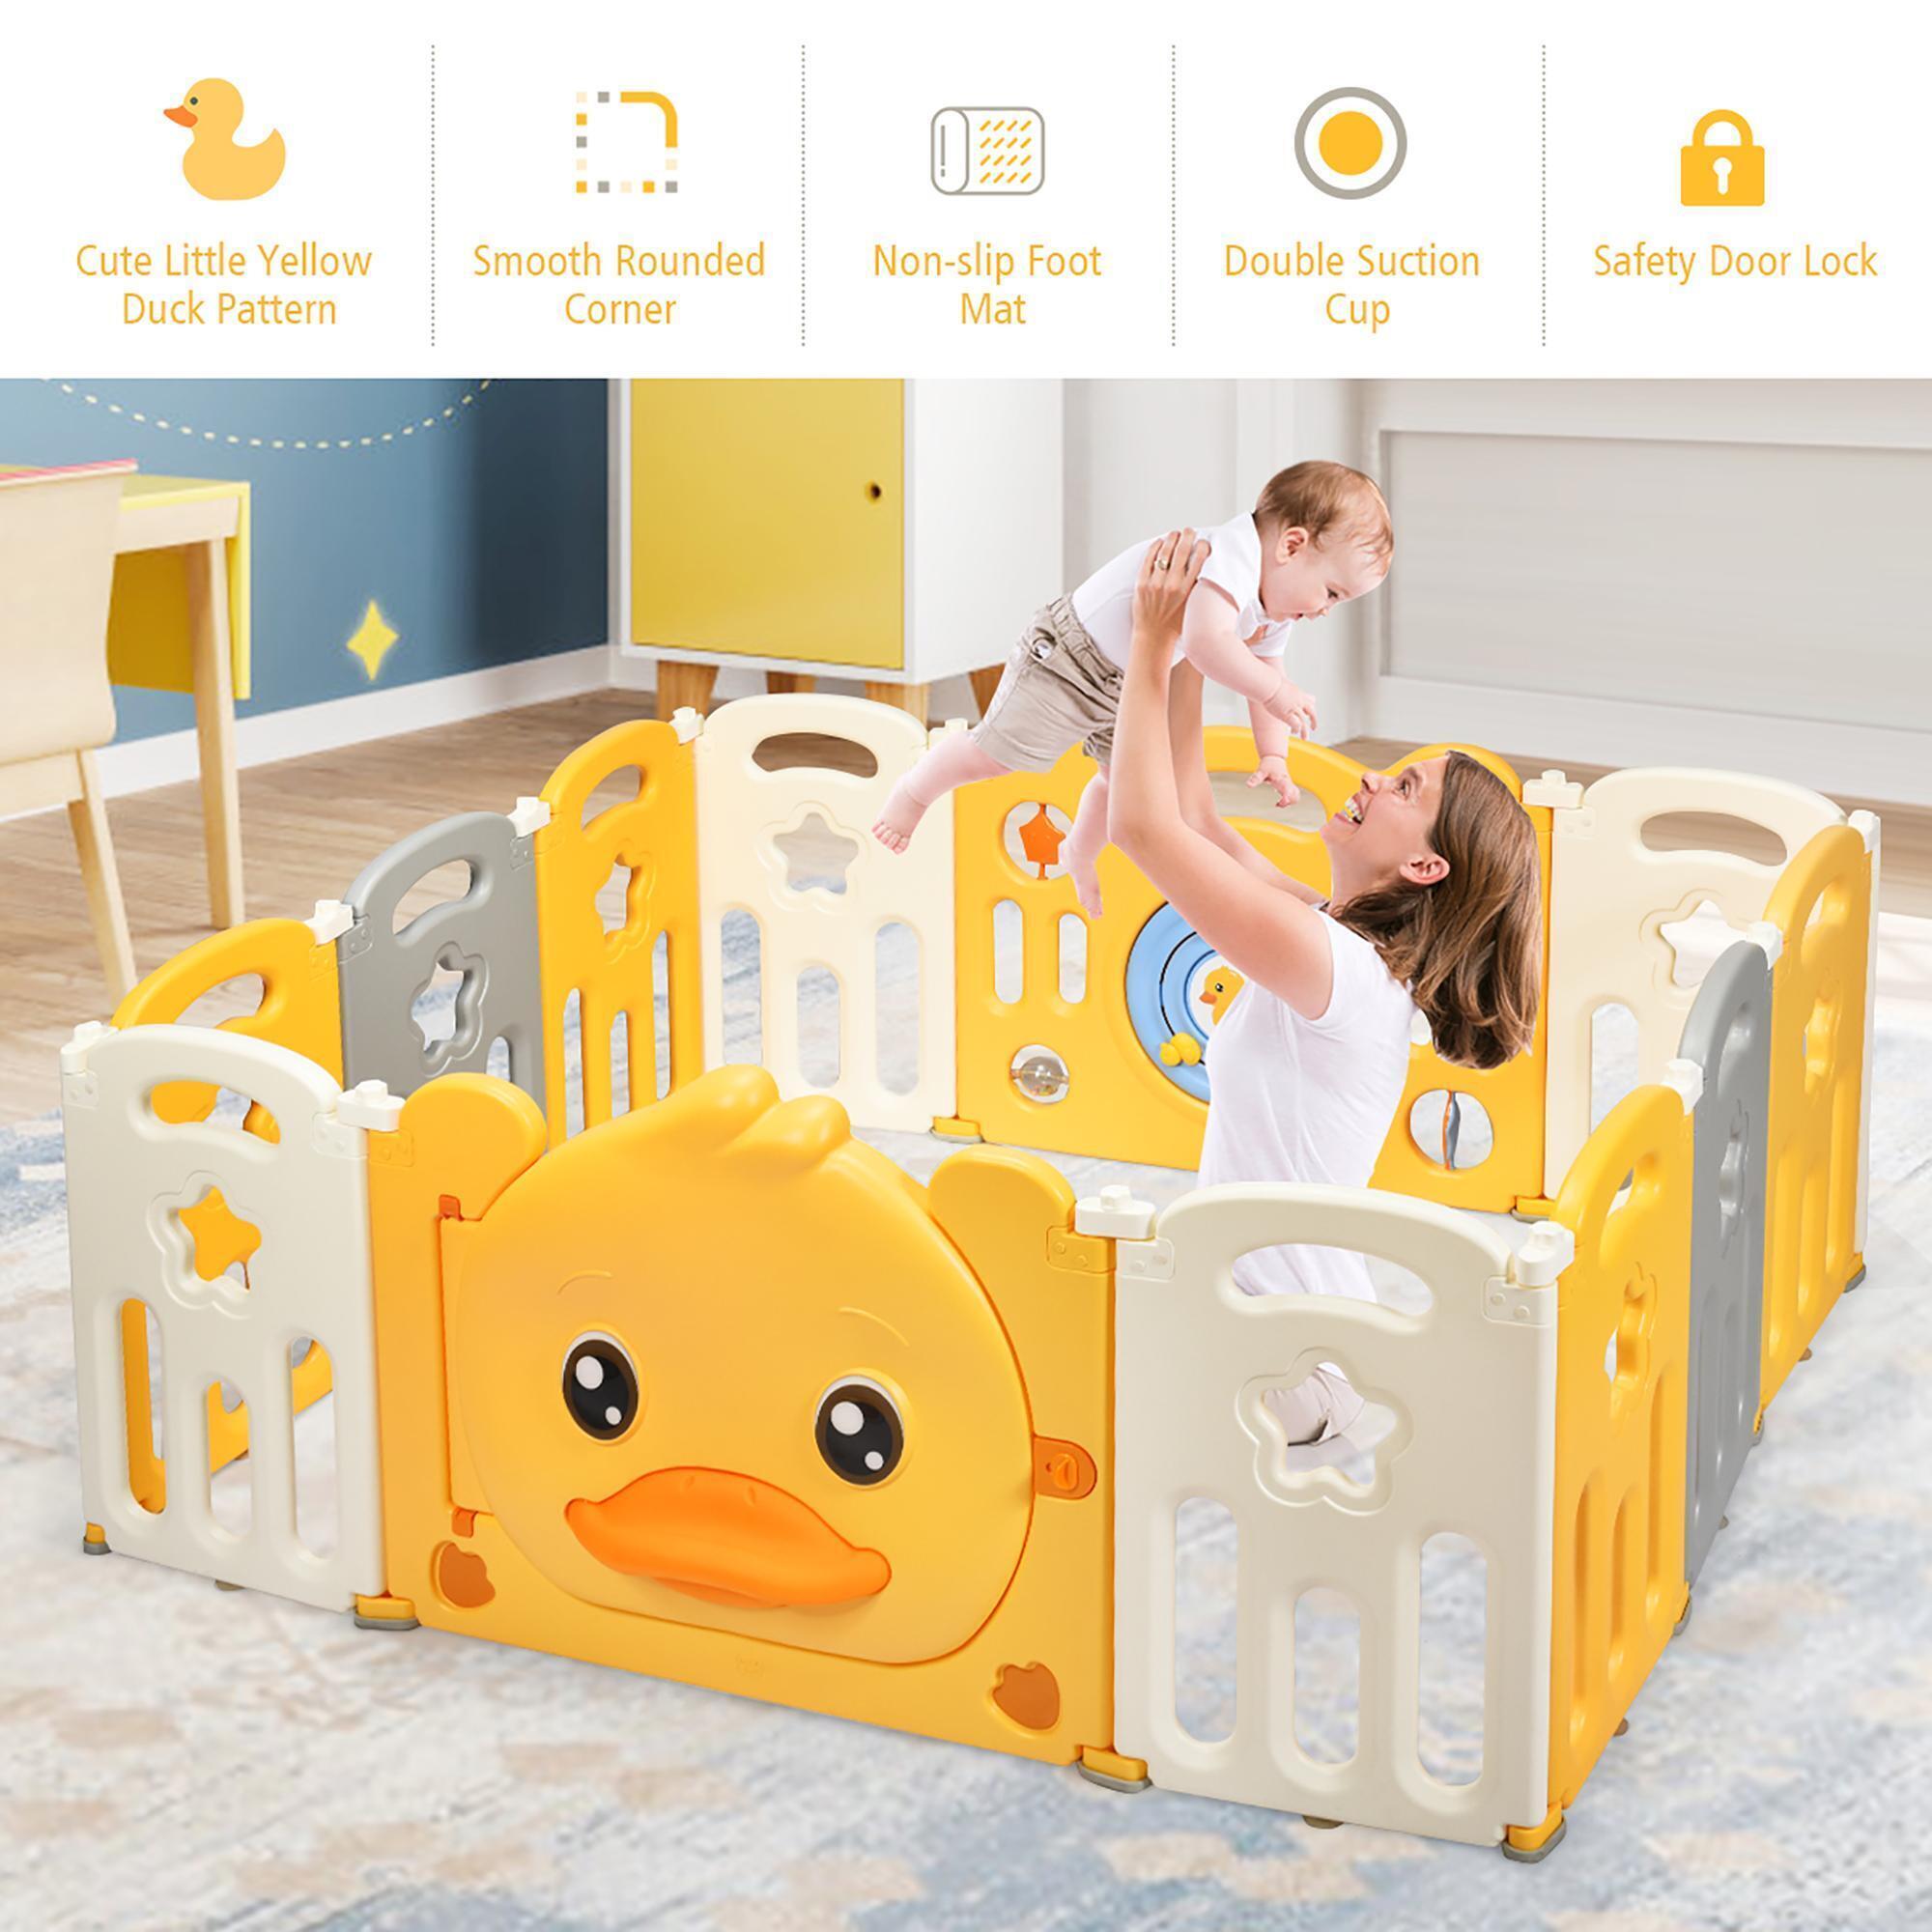 Costway 12-Panel Foldable Baby Playpen Kids Yellow Duck Yard Activity Center with Sound alternate image